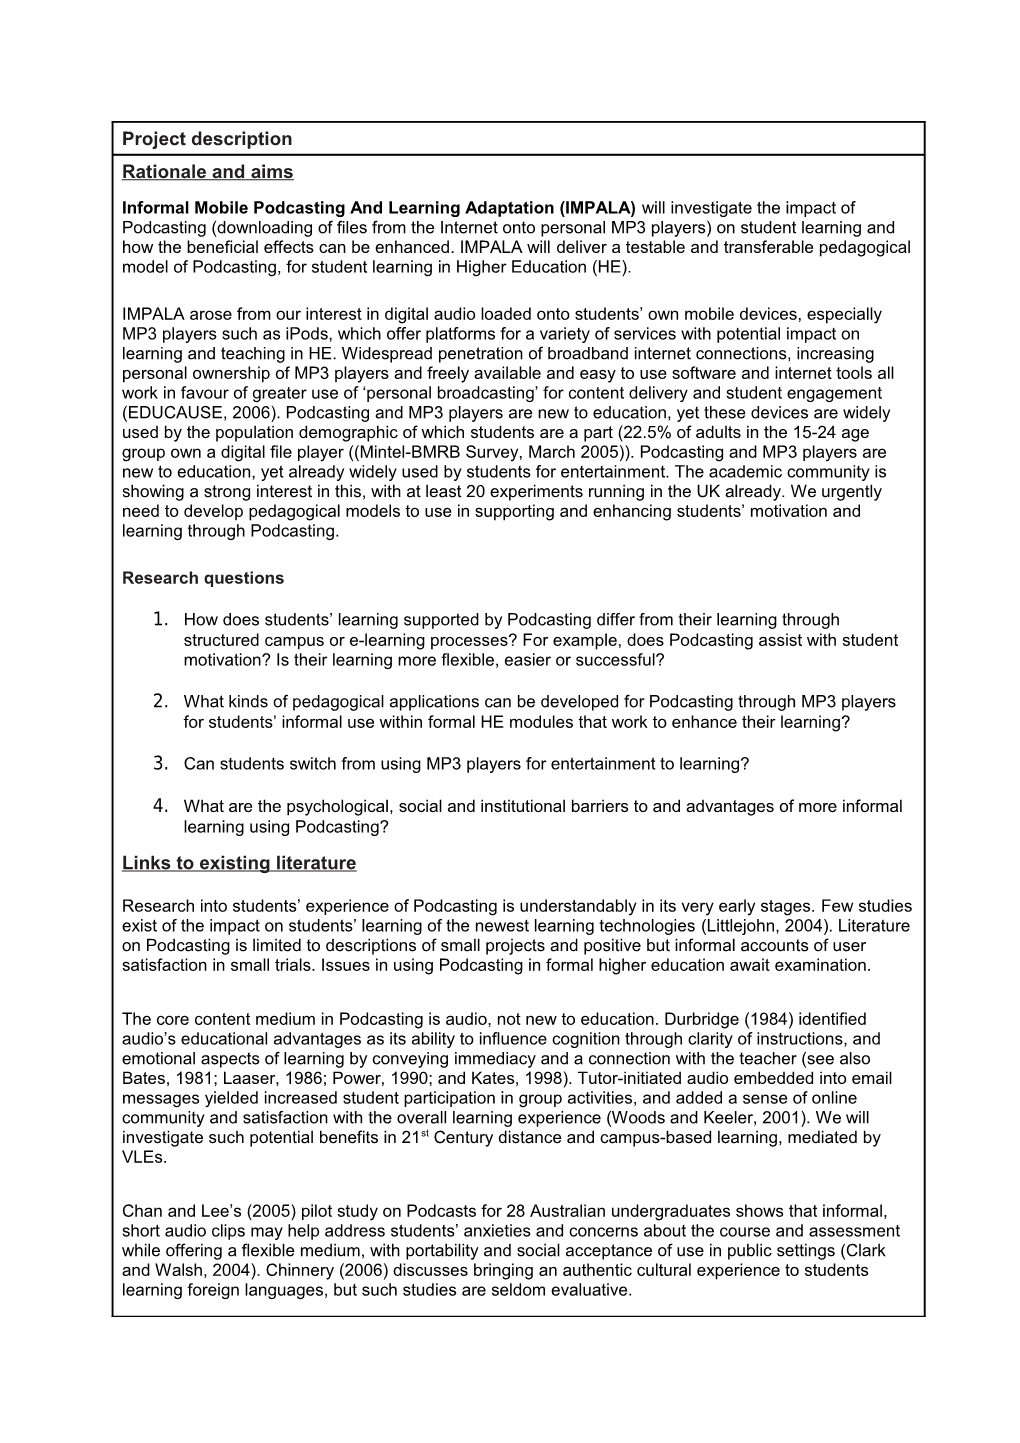 Higher Educationacademy E-Learning Research Grants 2006